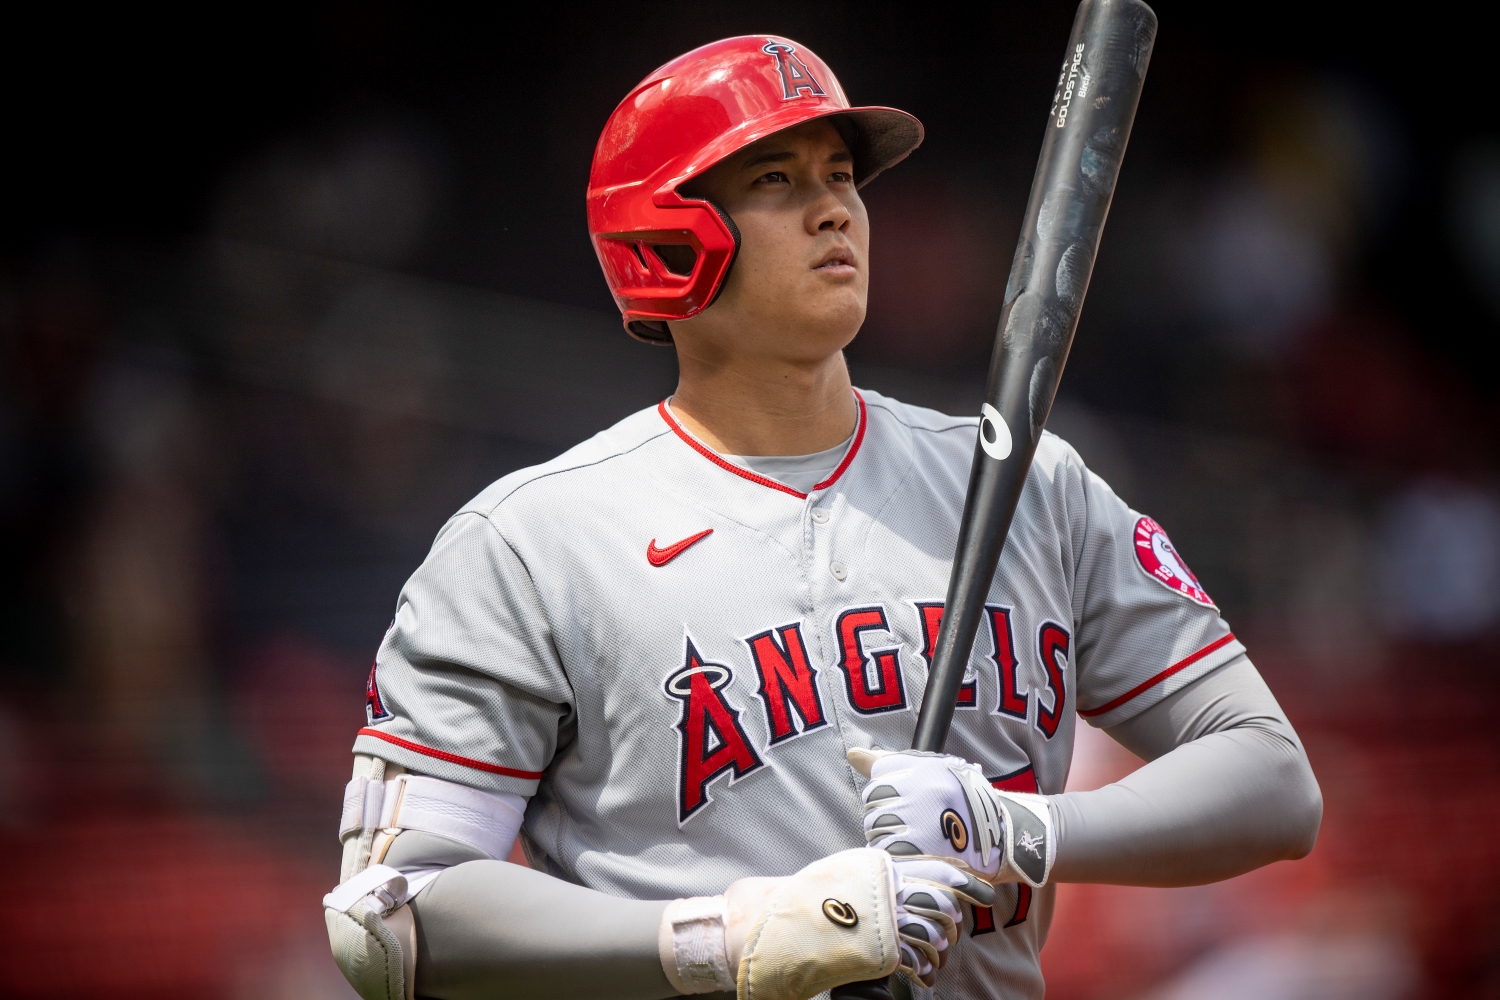 Shohei Ohtani looks on during the first inning of a game against the Boston Red Sox.